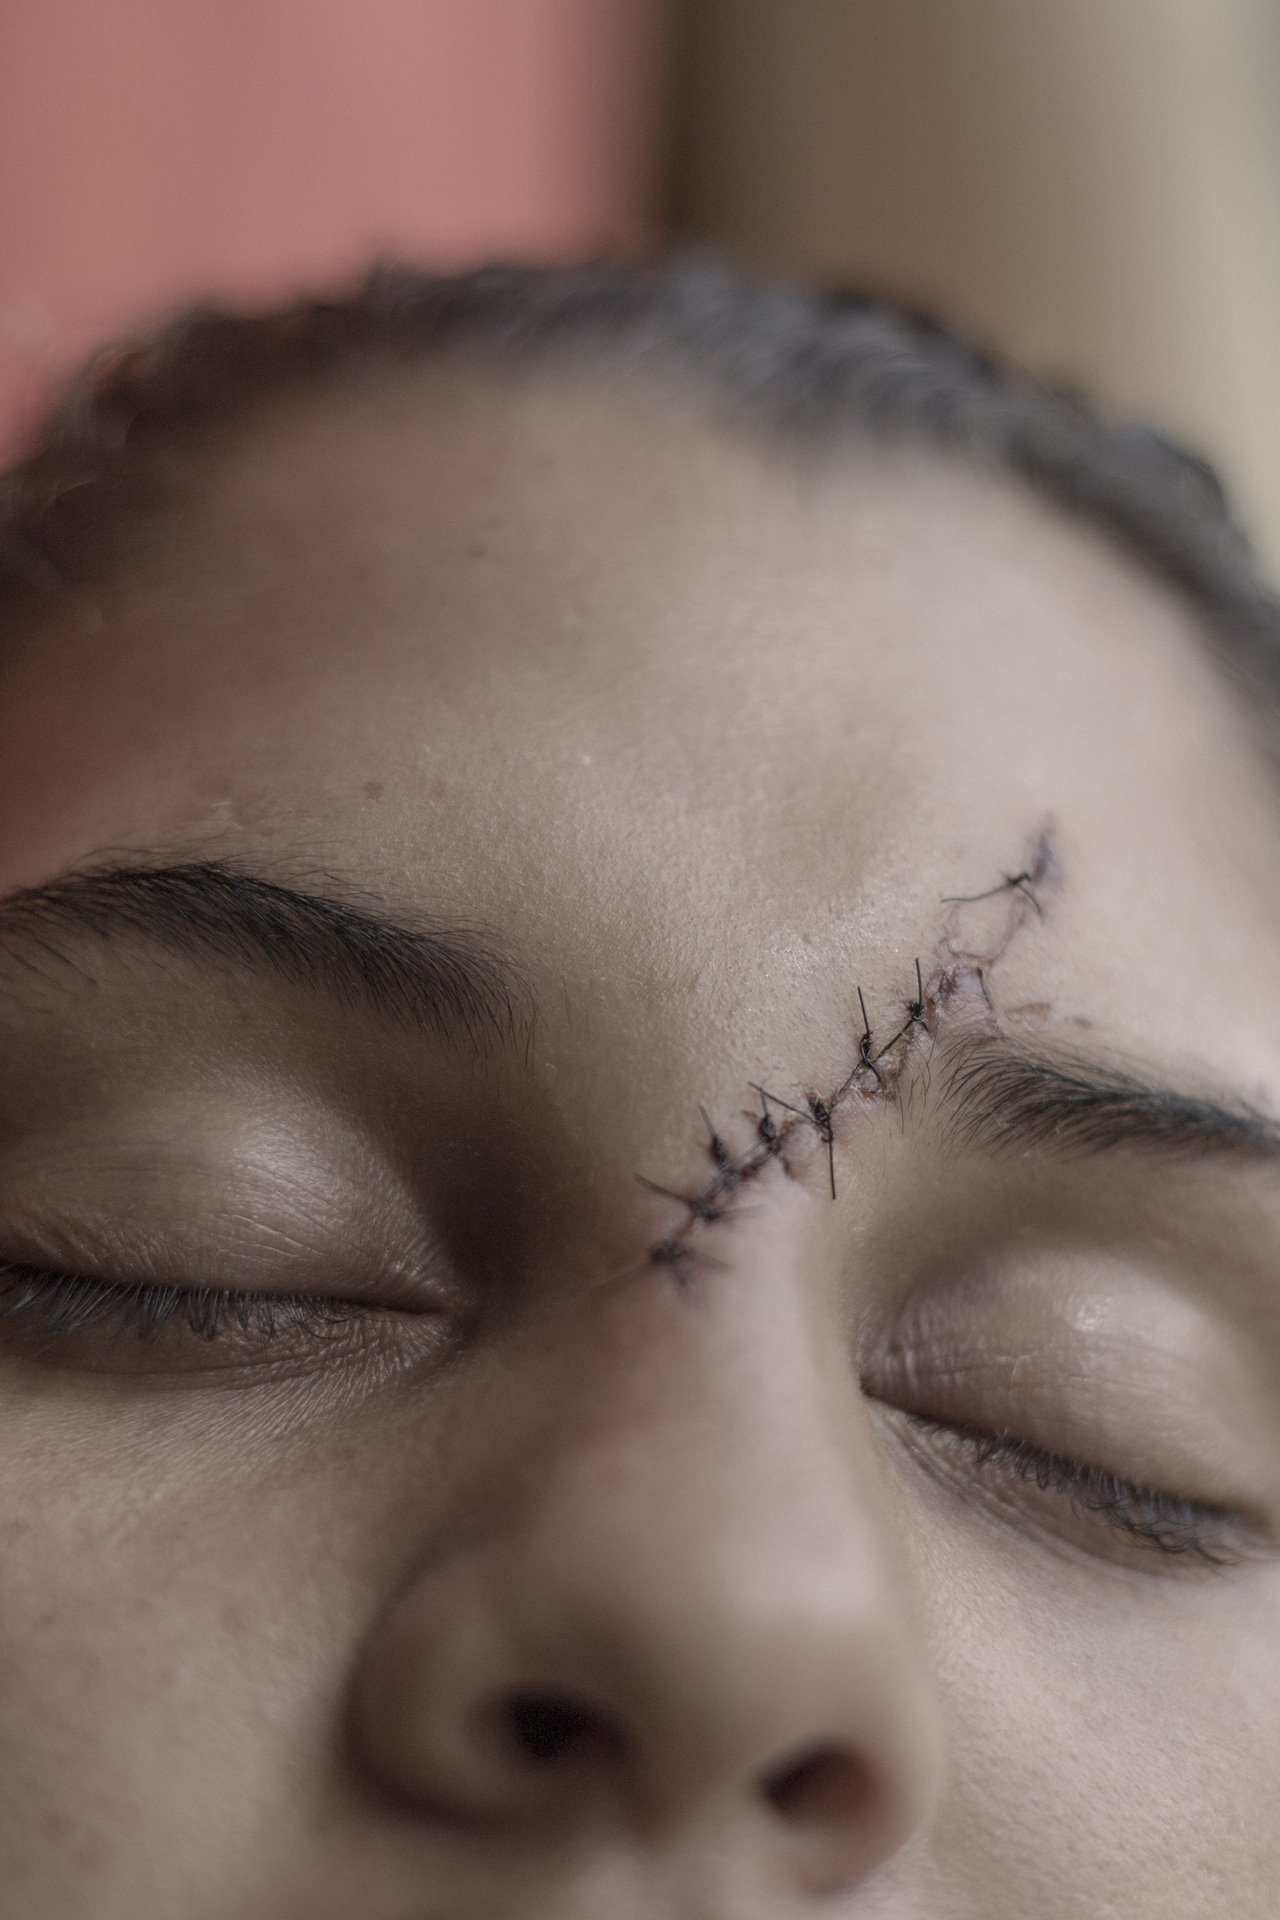 <p>A Venezuelan woman in the care of Colombian migration authorities bears the scar of an attack by a man who demanded sex as a payment for a tattoo, in Maicao, Colombia. Women migrants are often vulnerable to violence and human trafficking.</p>
